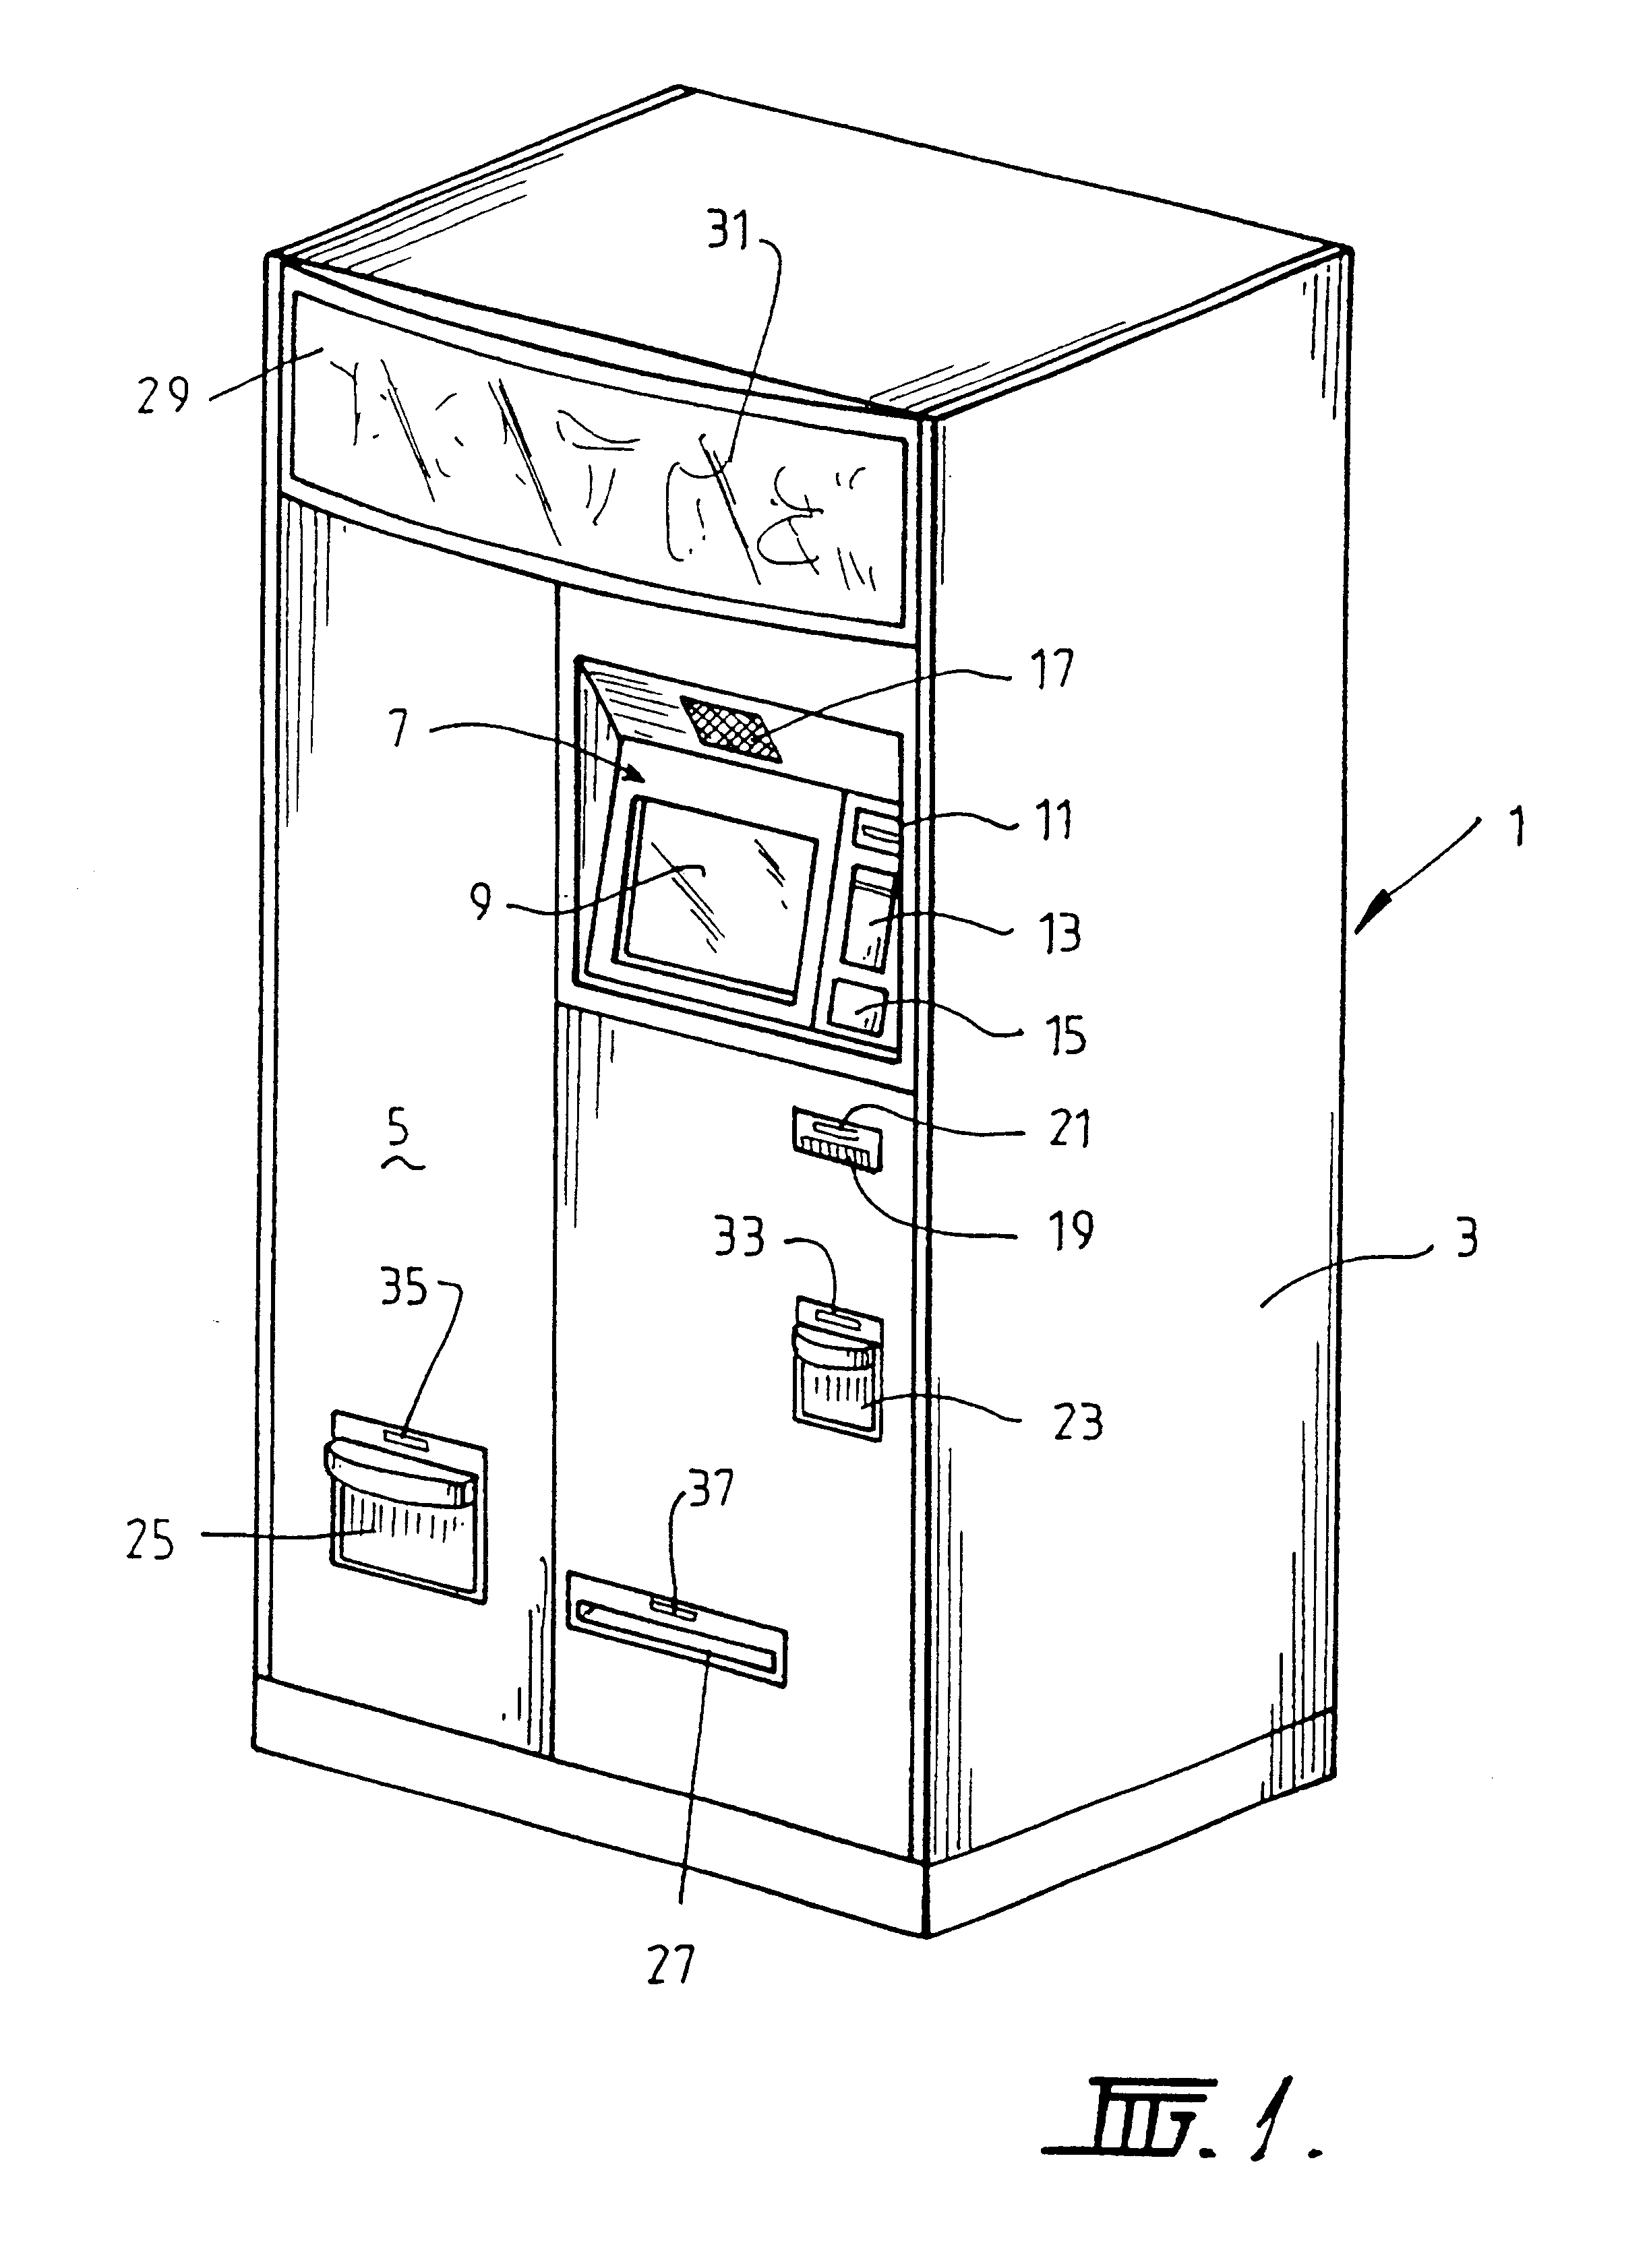 Product vending